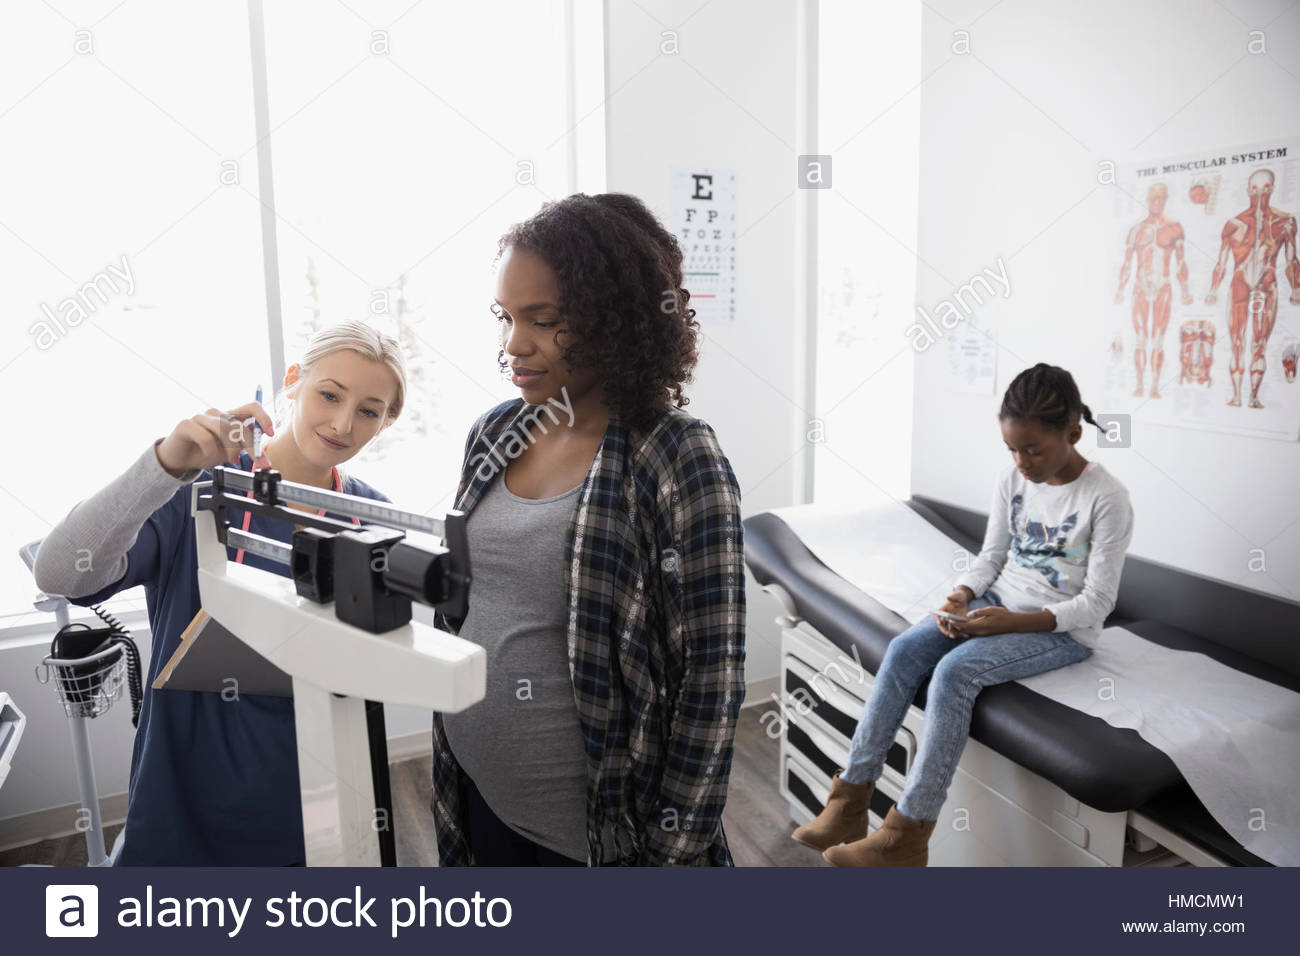 Female nurse checking weight of pregnant patient on scale in clinic examination room Stock Photo